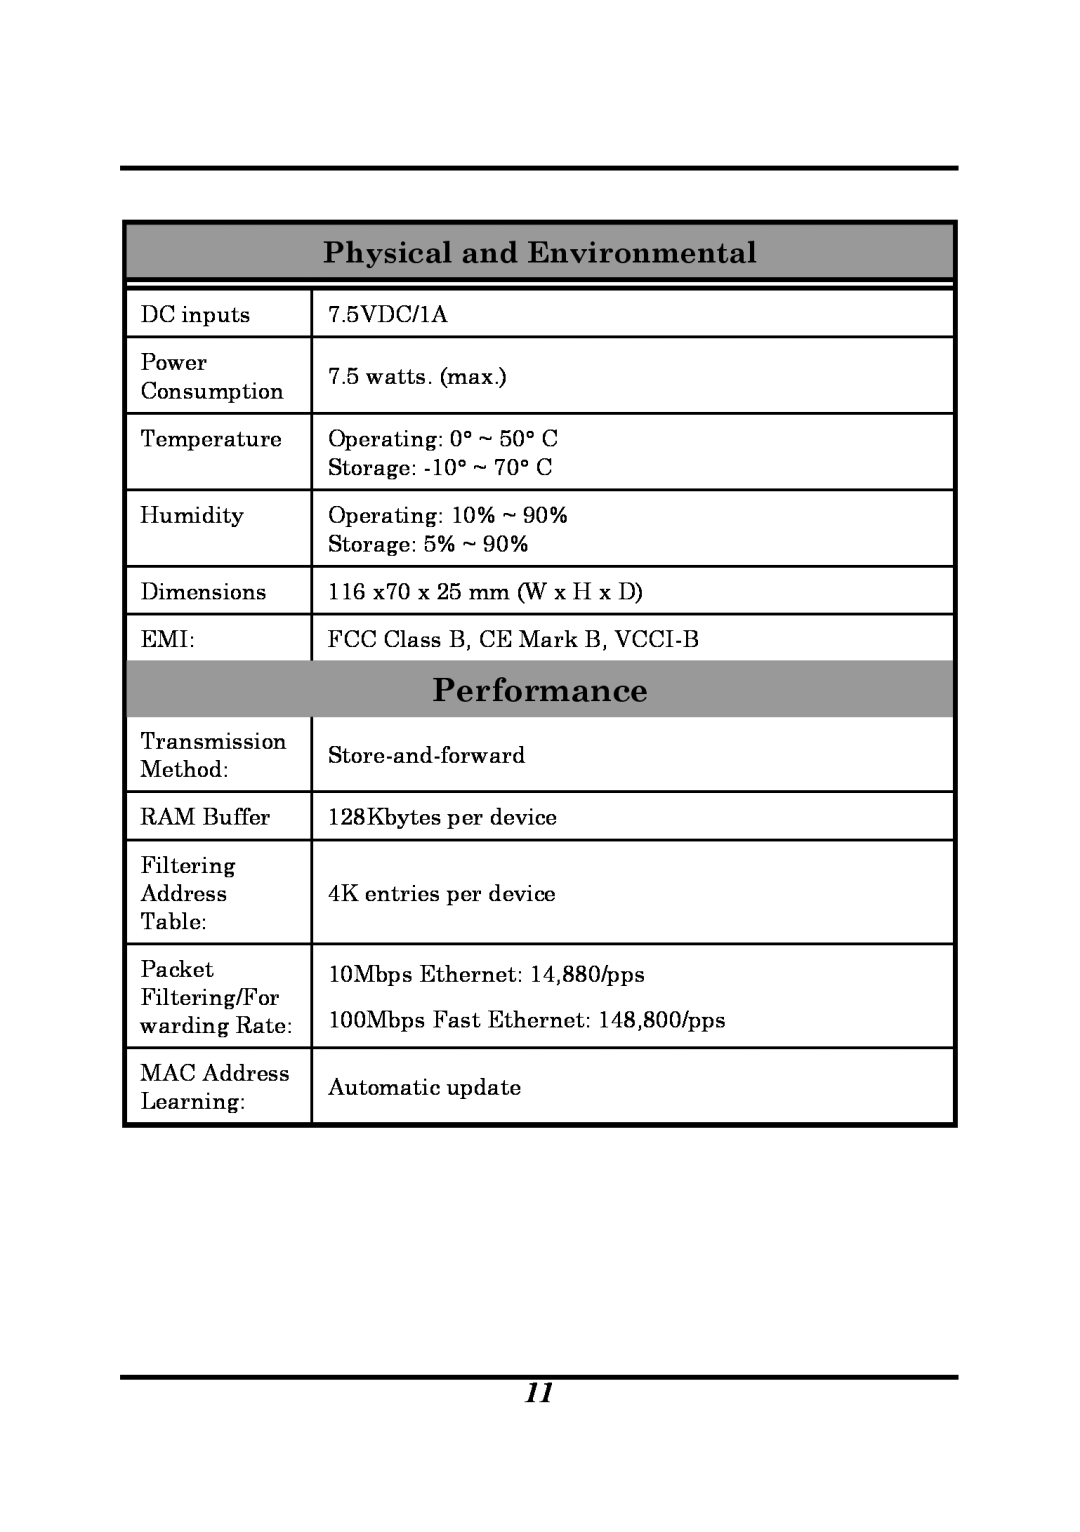 D-Link DSS-5 manual Performance, Physical and Environmental 